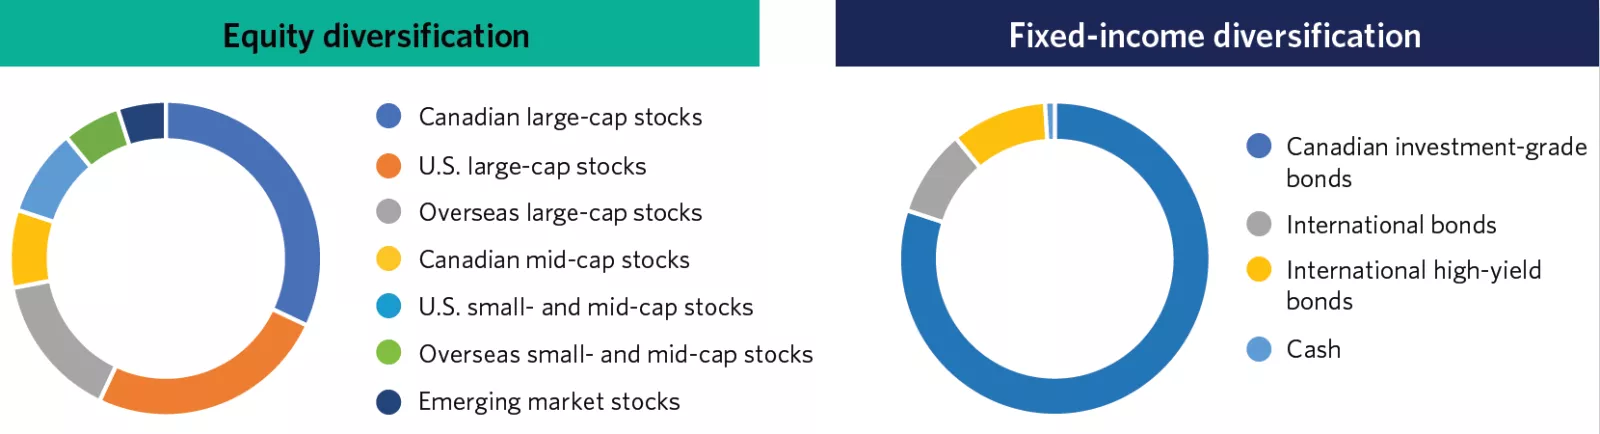  Strategic asset allocation guidance for equity diversification and fixed-income diversification.
